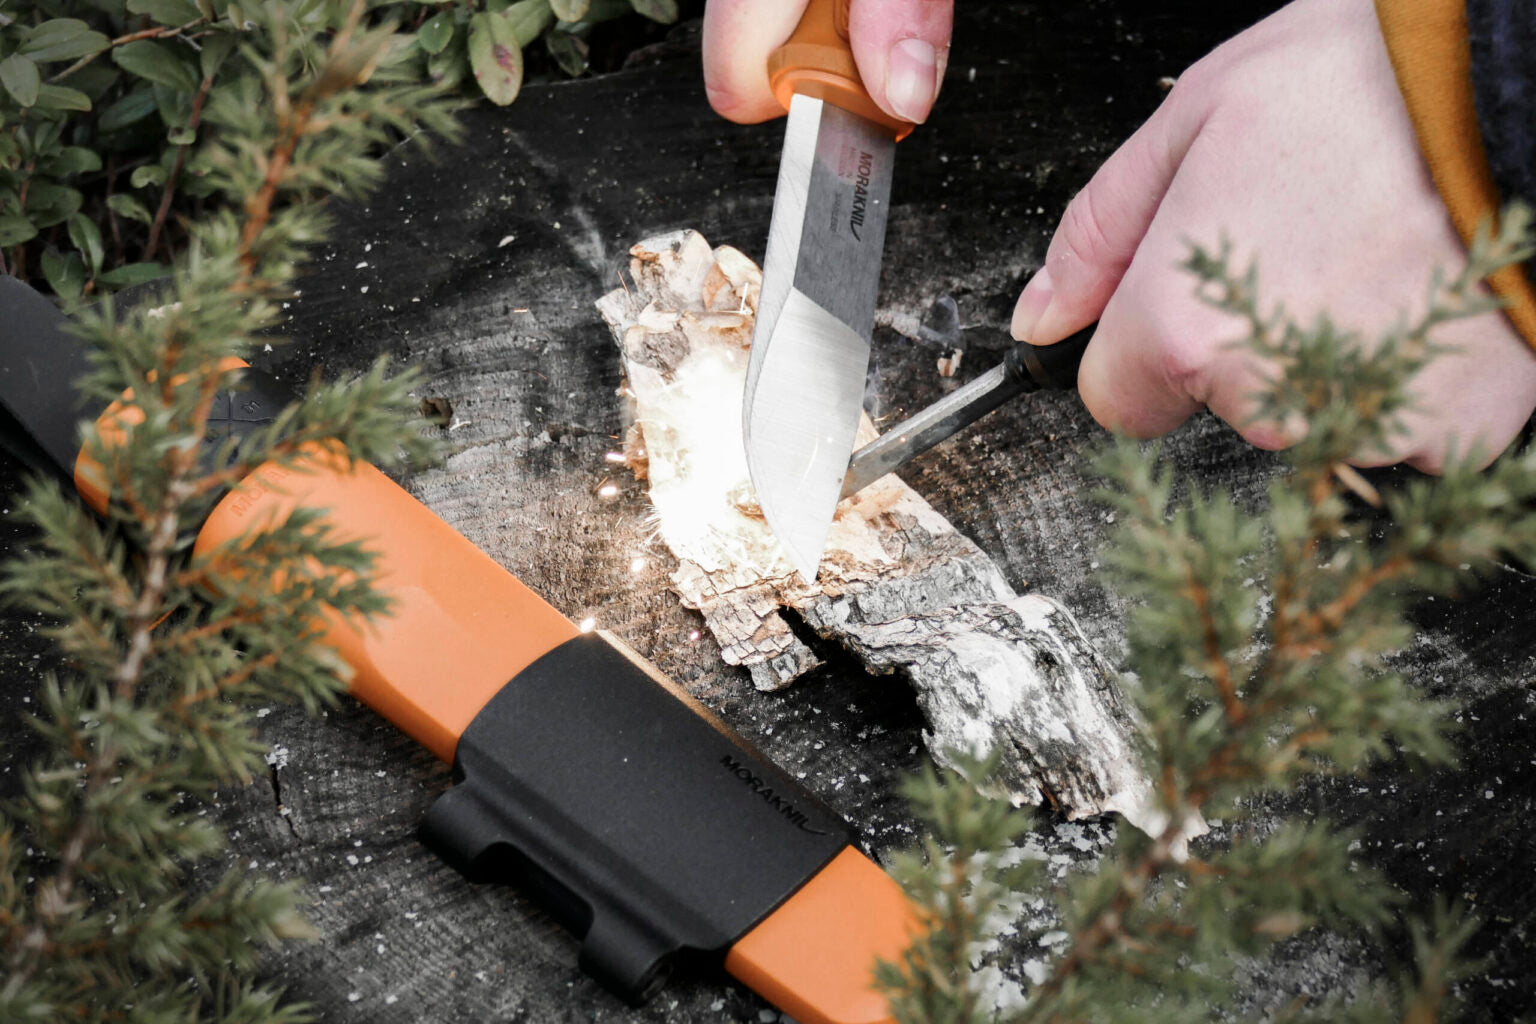 FIRE STARTING SKILLS FOR CAMPERS AND SURVIVALISTS